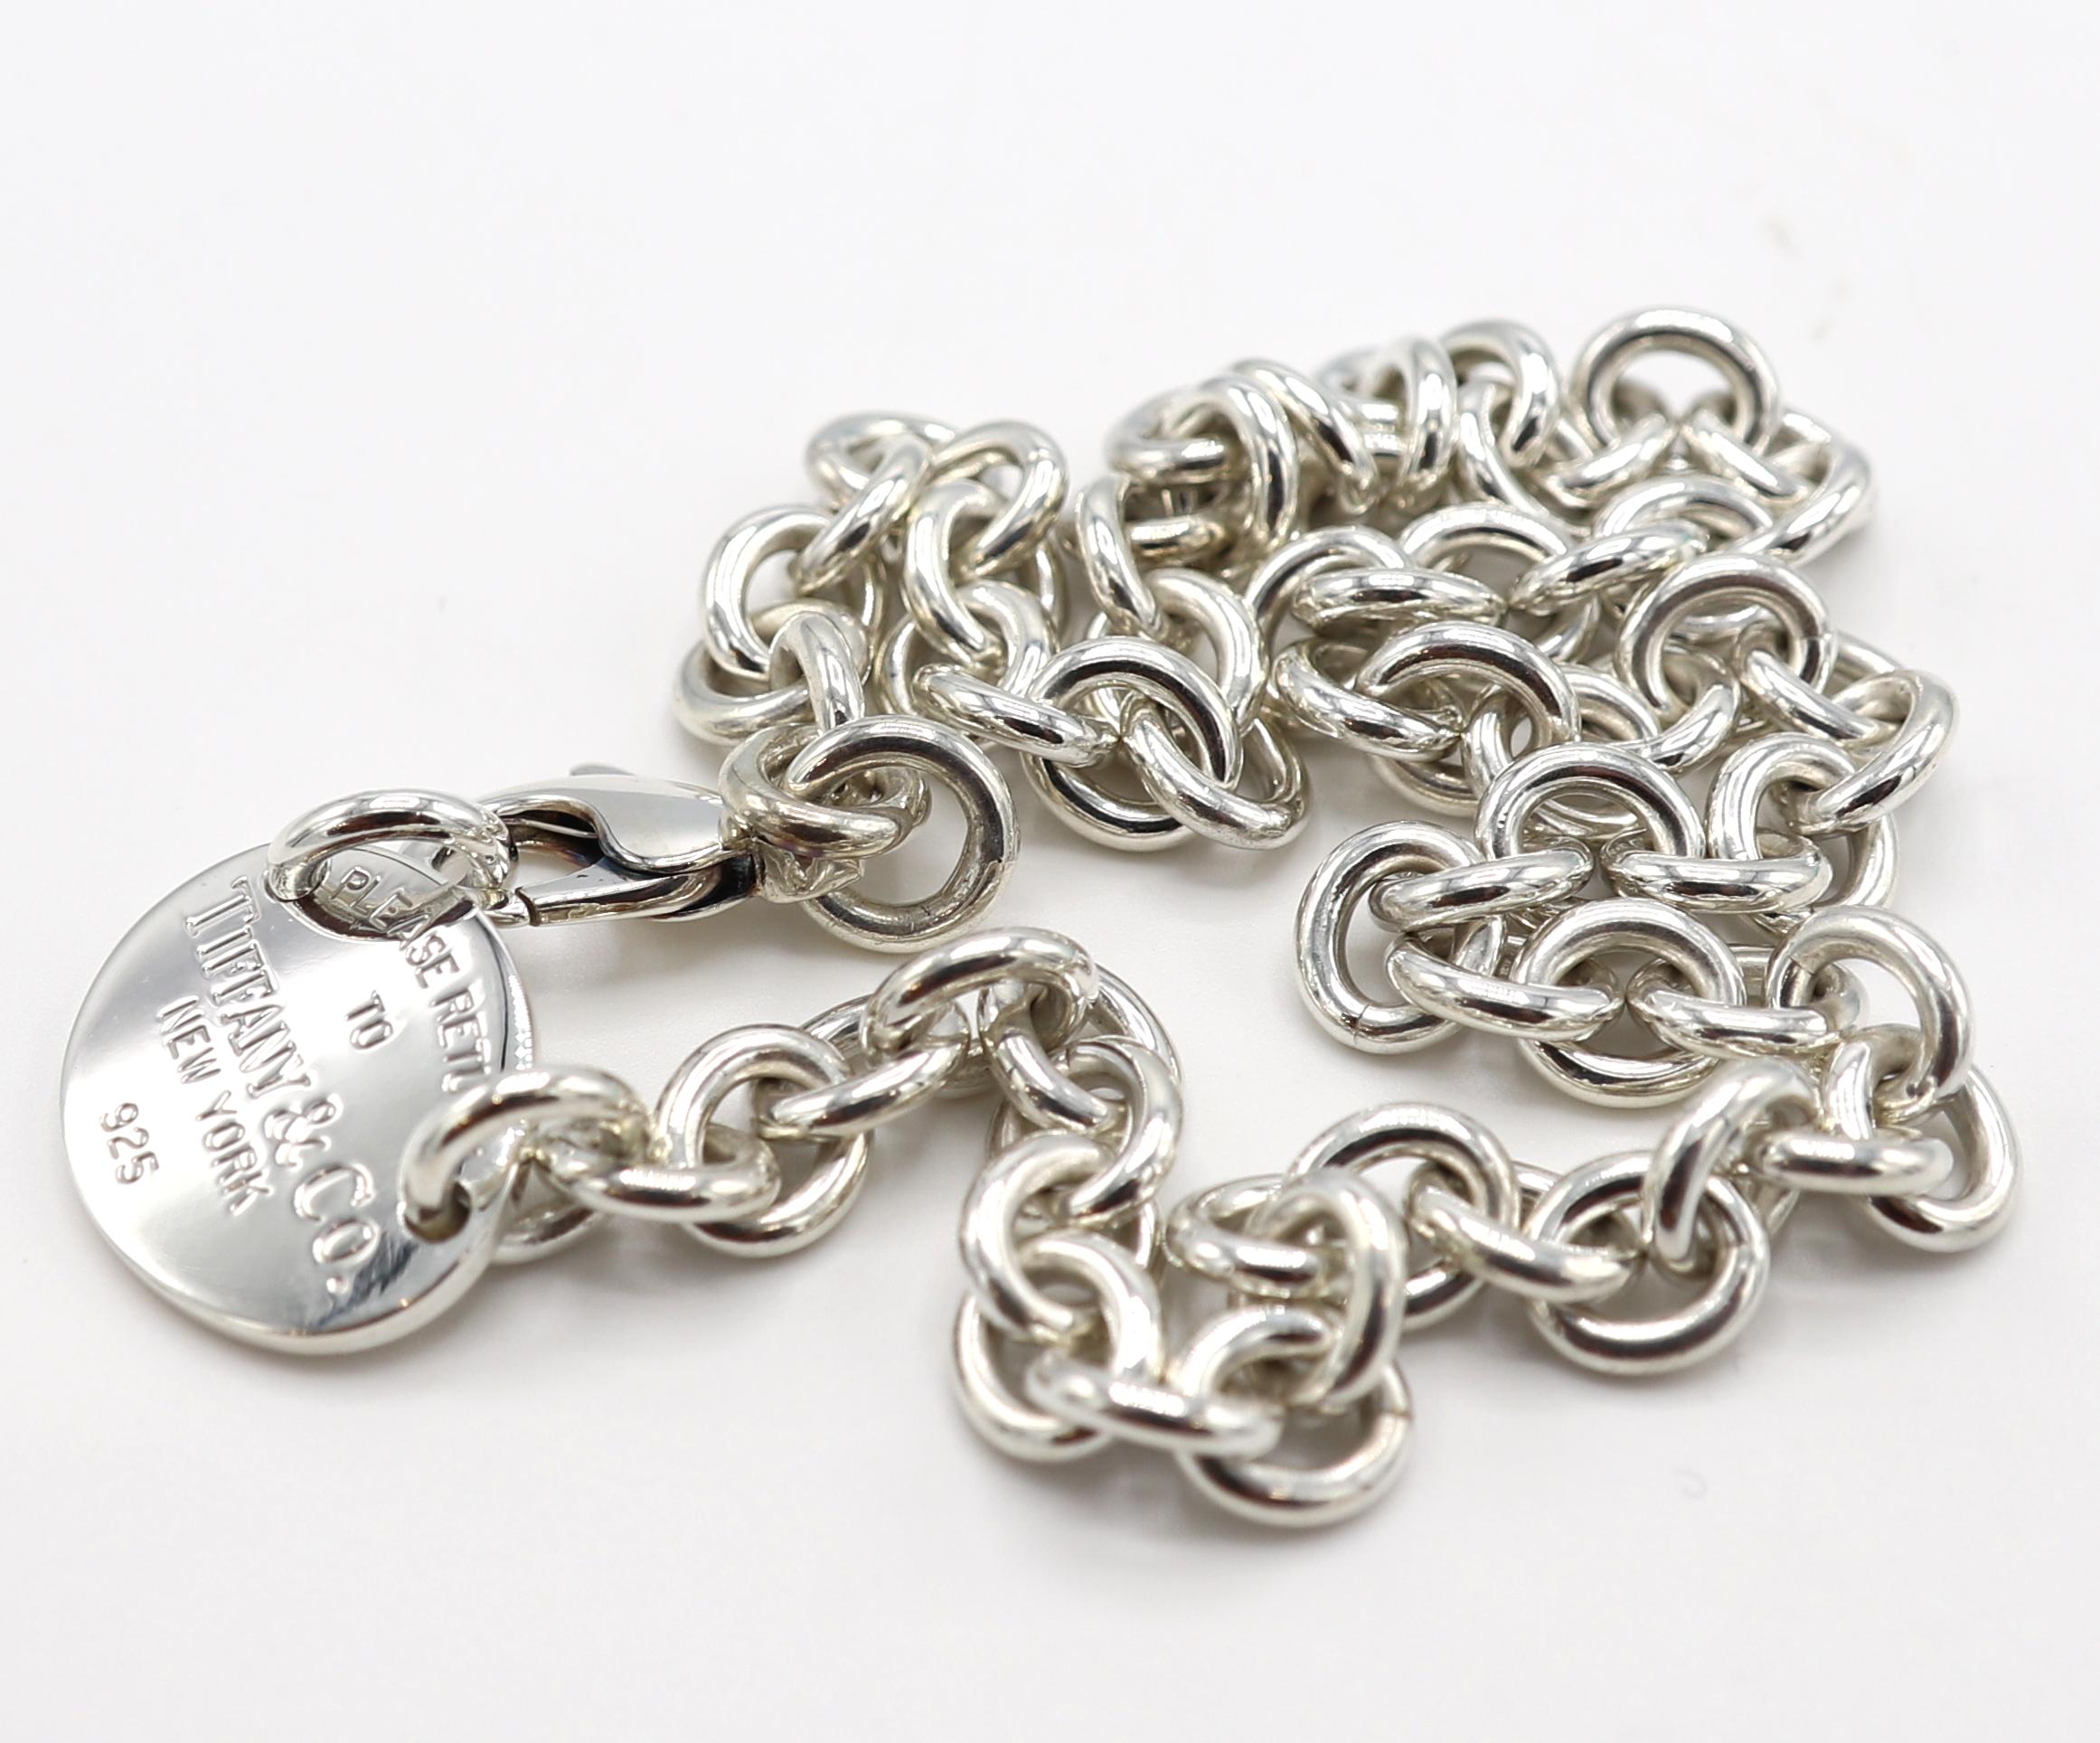 Tiffany & Co. Return To Tiffany Oval Link Tag Necklace Sterling Silver 
Metal: Sterling silver
Weight: 53.6 grams
Length: 15.5 inches
Links: 8 x 9mm
Tag: 22.5 x 18mm
Signed: Please Return to Tiffany & Co. New York 925 